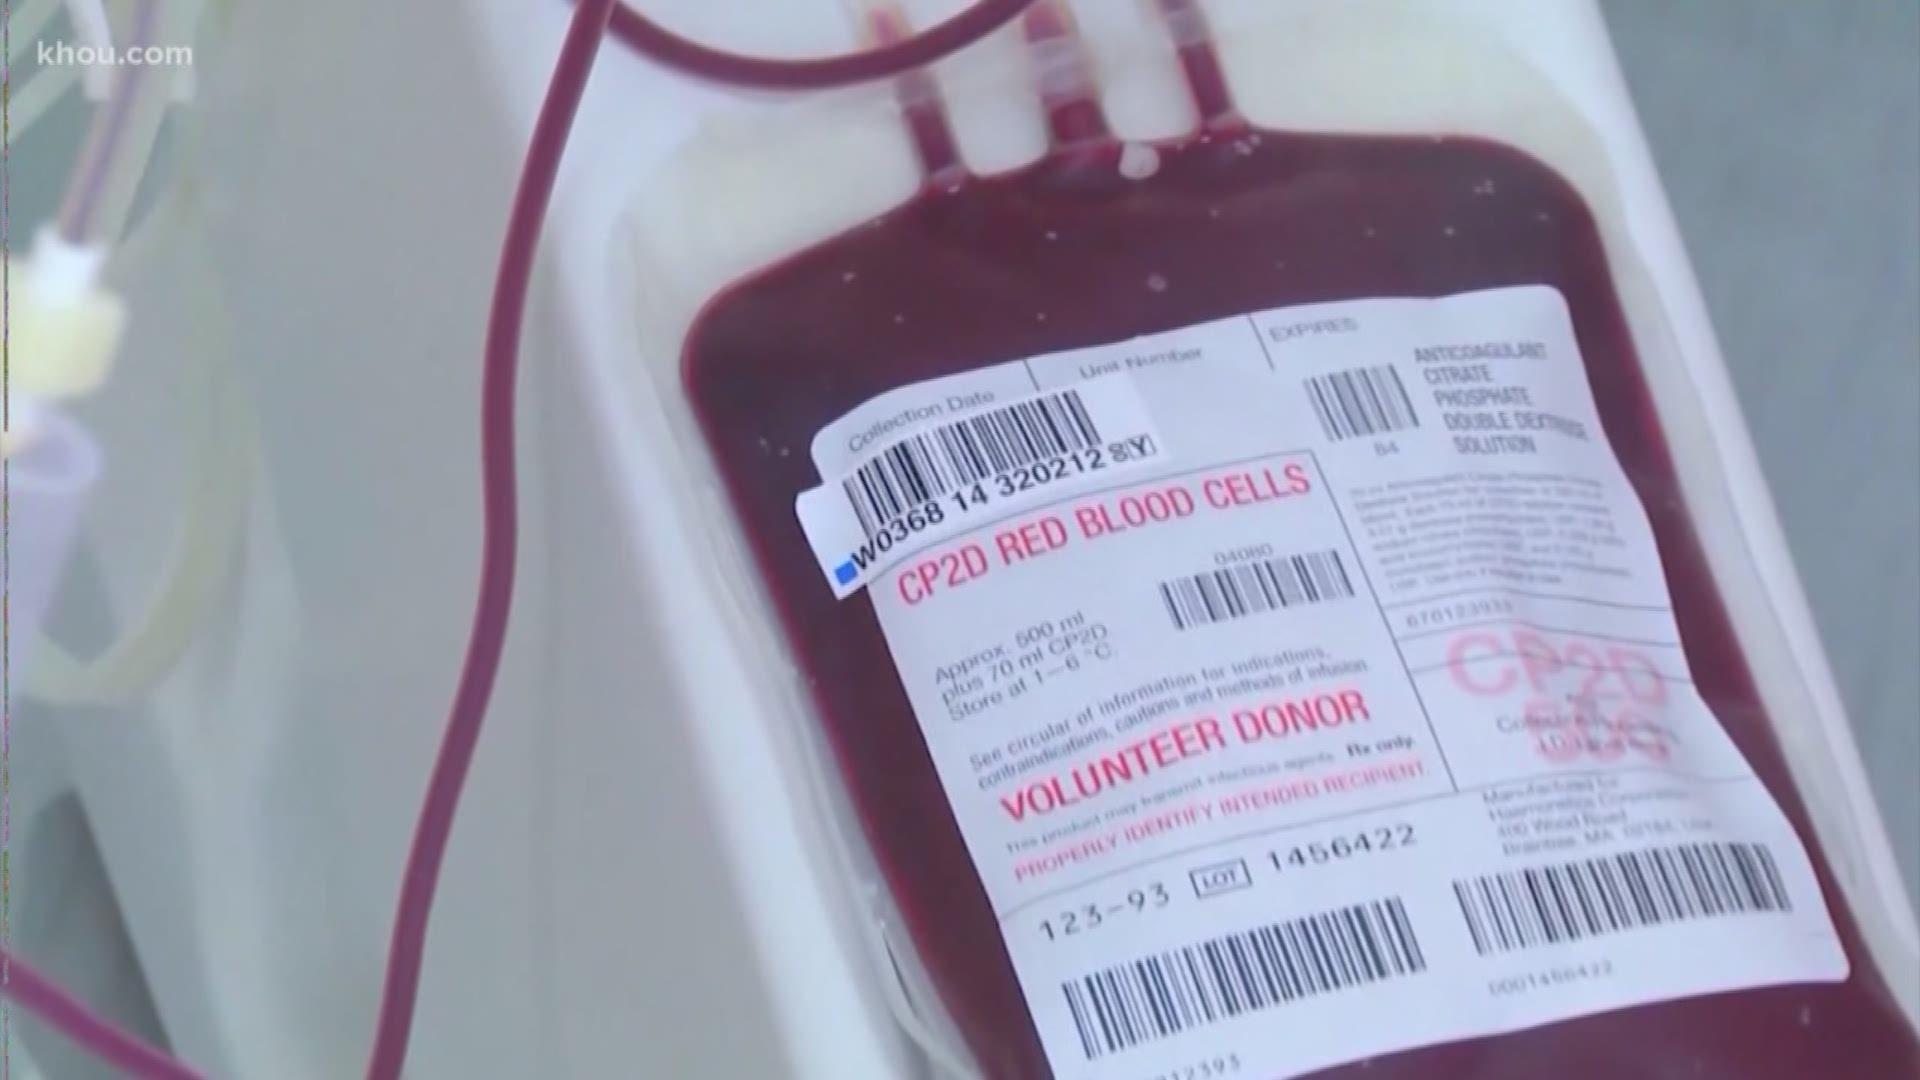 What if you could reverse the aging process simply by getting a blood transfusion? That's what a new company called "Ambrosia" claims to do.